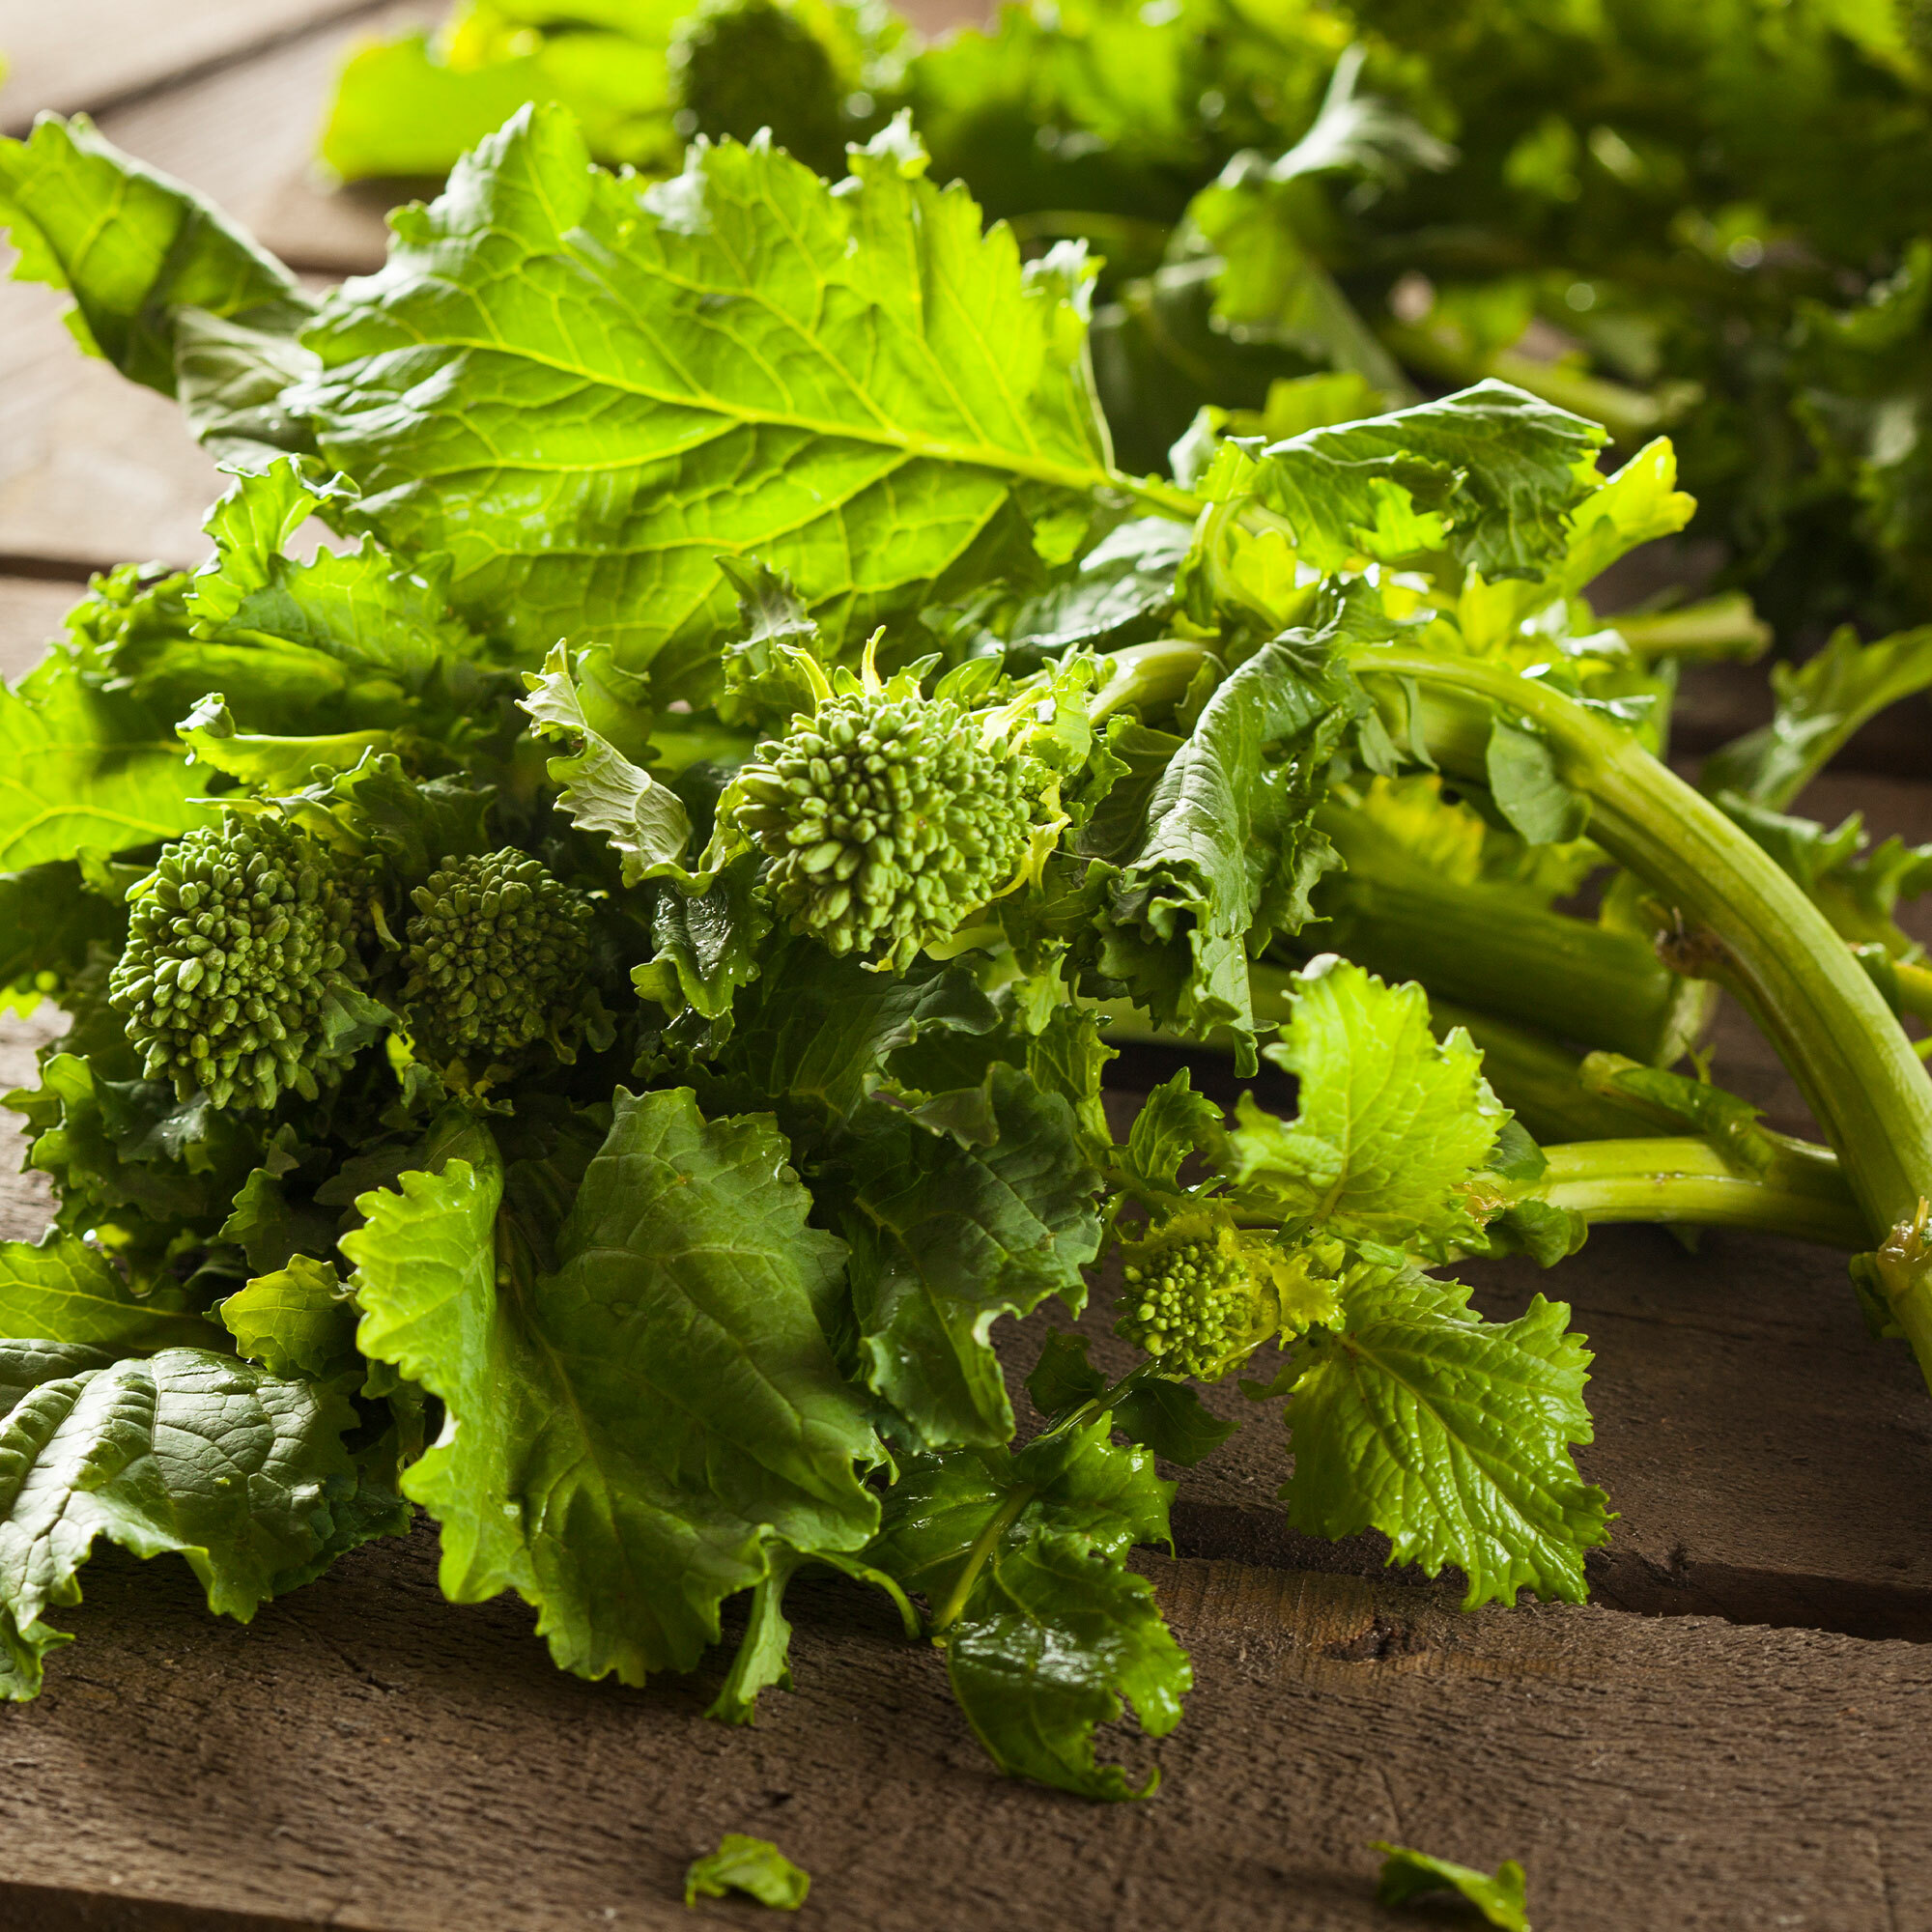 Broccoli Raab, also called false broccoli, is actually closely related to mustards and turnips with a bitter, sharper flavor than traditional broccoli.  It’s used widely in Italian and Chinese cuisine. Great for early-fall harvesting.   TRUE LEAF MARKET